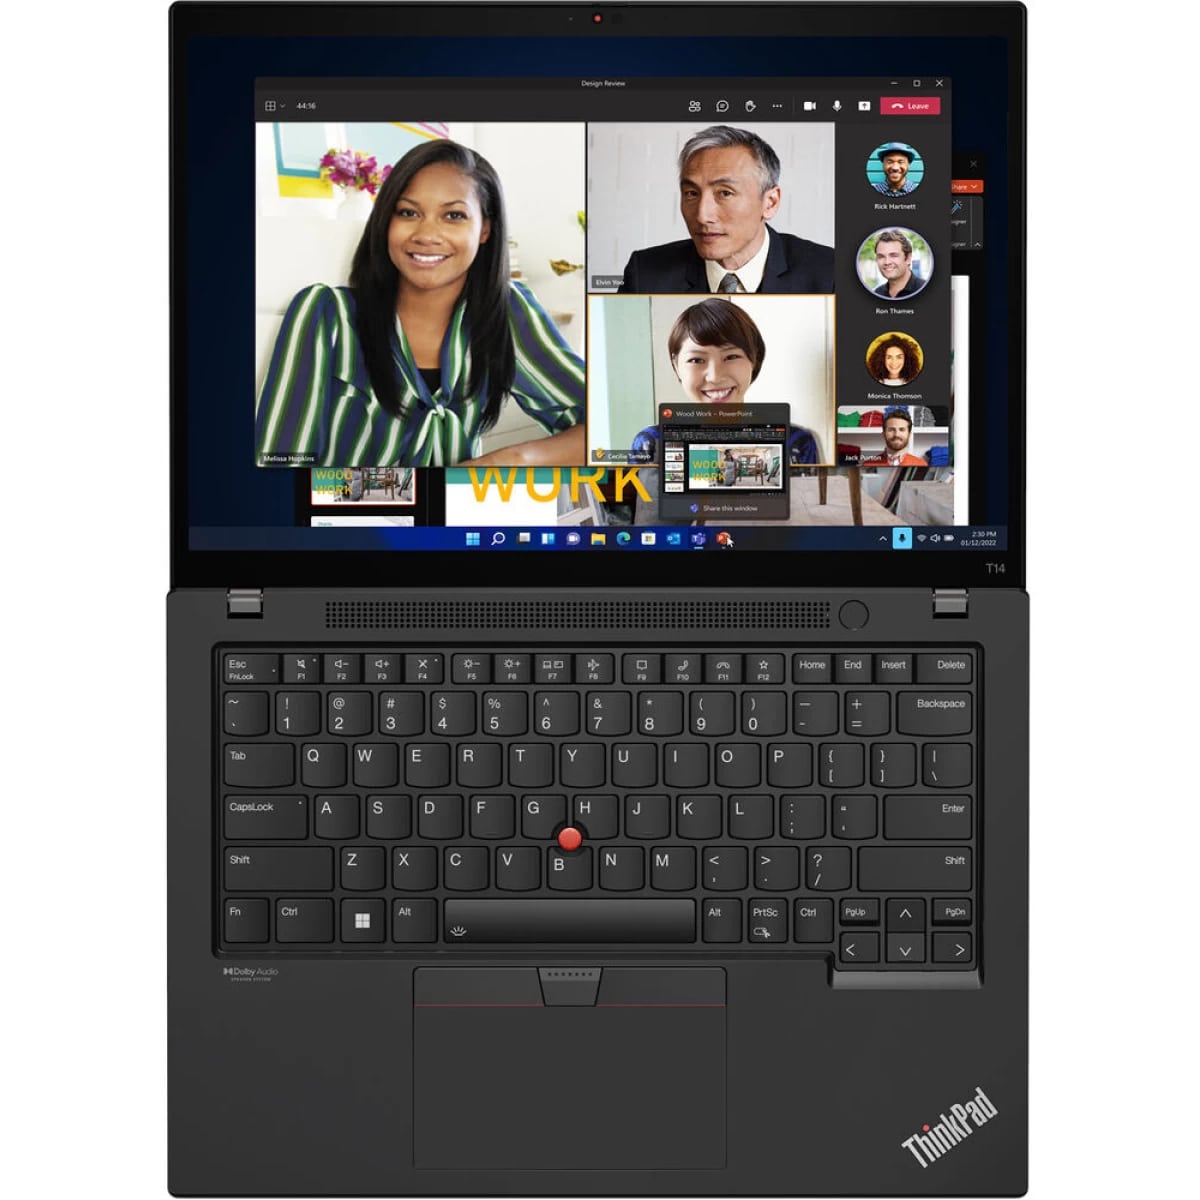 Lenovo NEW ThinkPad T14 Gen 3 Intel Core i7 up to 4.7GHz 18M Cash 12-Cores